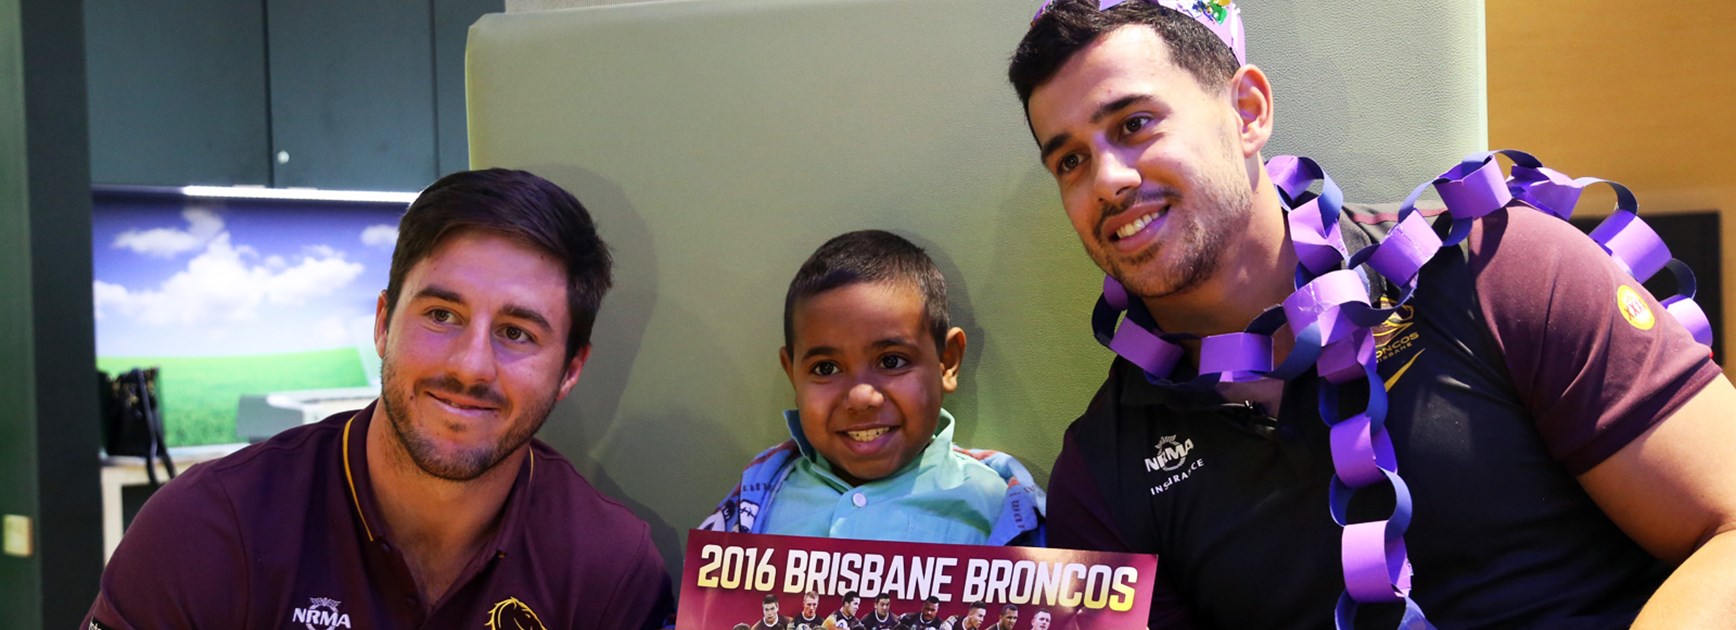 Broncos stars Ben Hunt and Jordan Kahu put some smiles on the faces of sick kids in Brisbane's Lady Cilento Hospital this week.